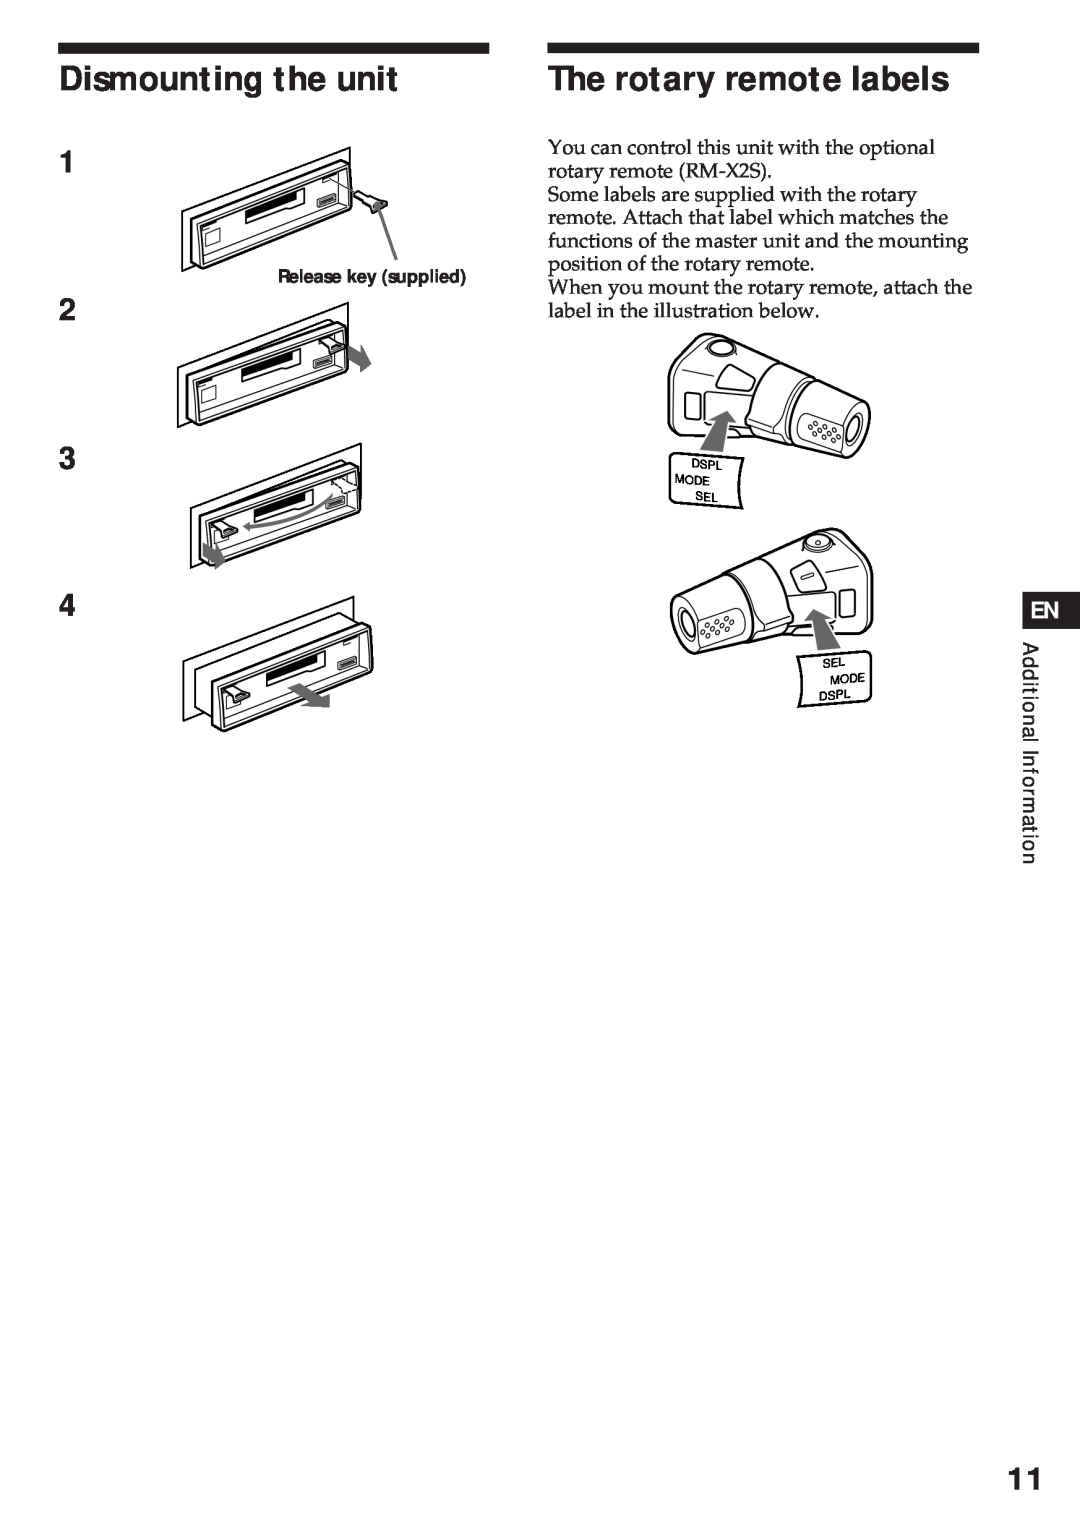 Sony XR-3750 operating instructions Dismounting the unit, The rotary remote labels 